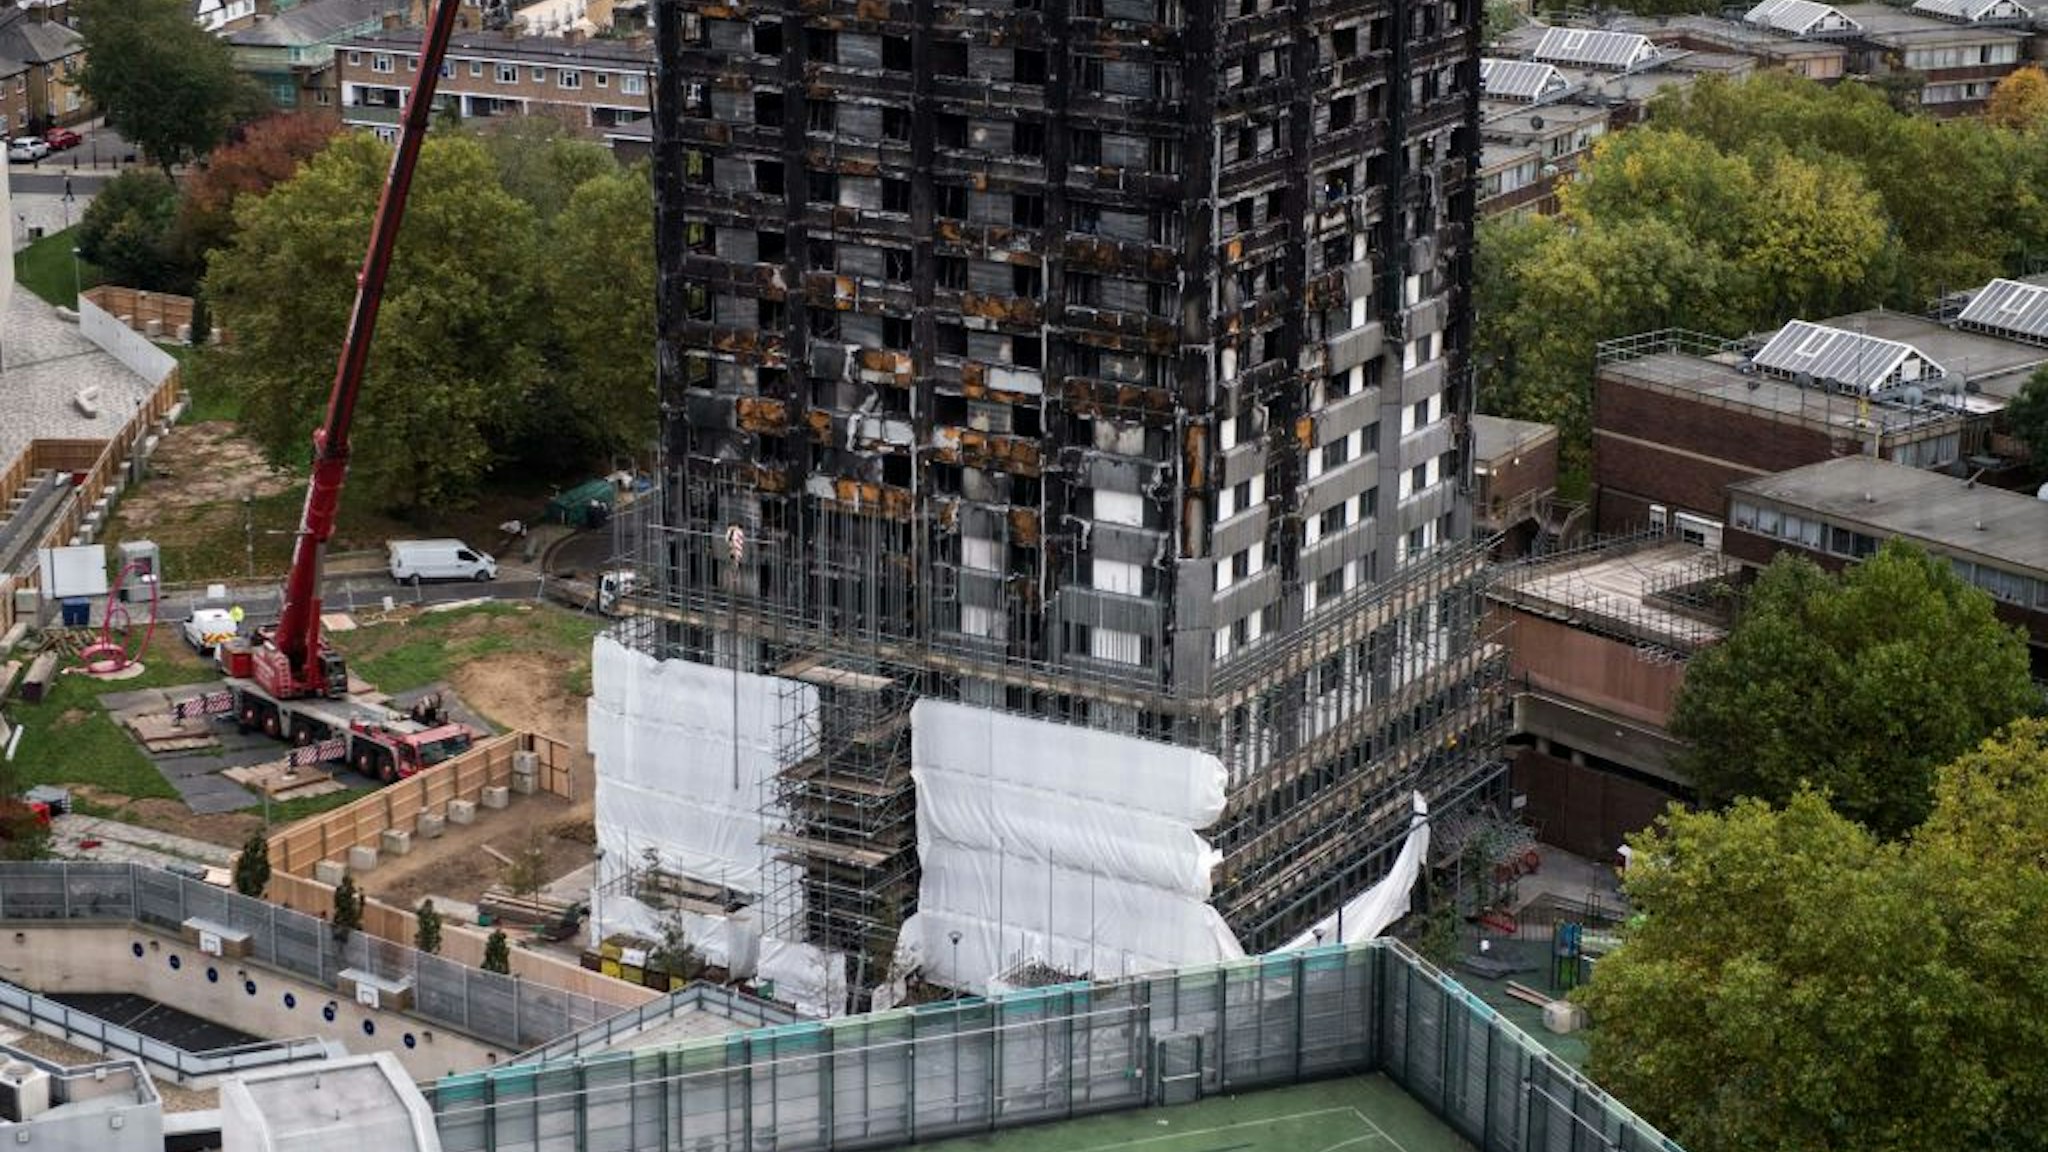 Scaffolding is seen with coverings at the base of the burned-out-shell of Grenfell Tower in London on October 17, 2017 as investigations continue into the tragedy.